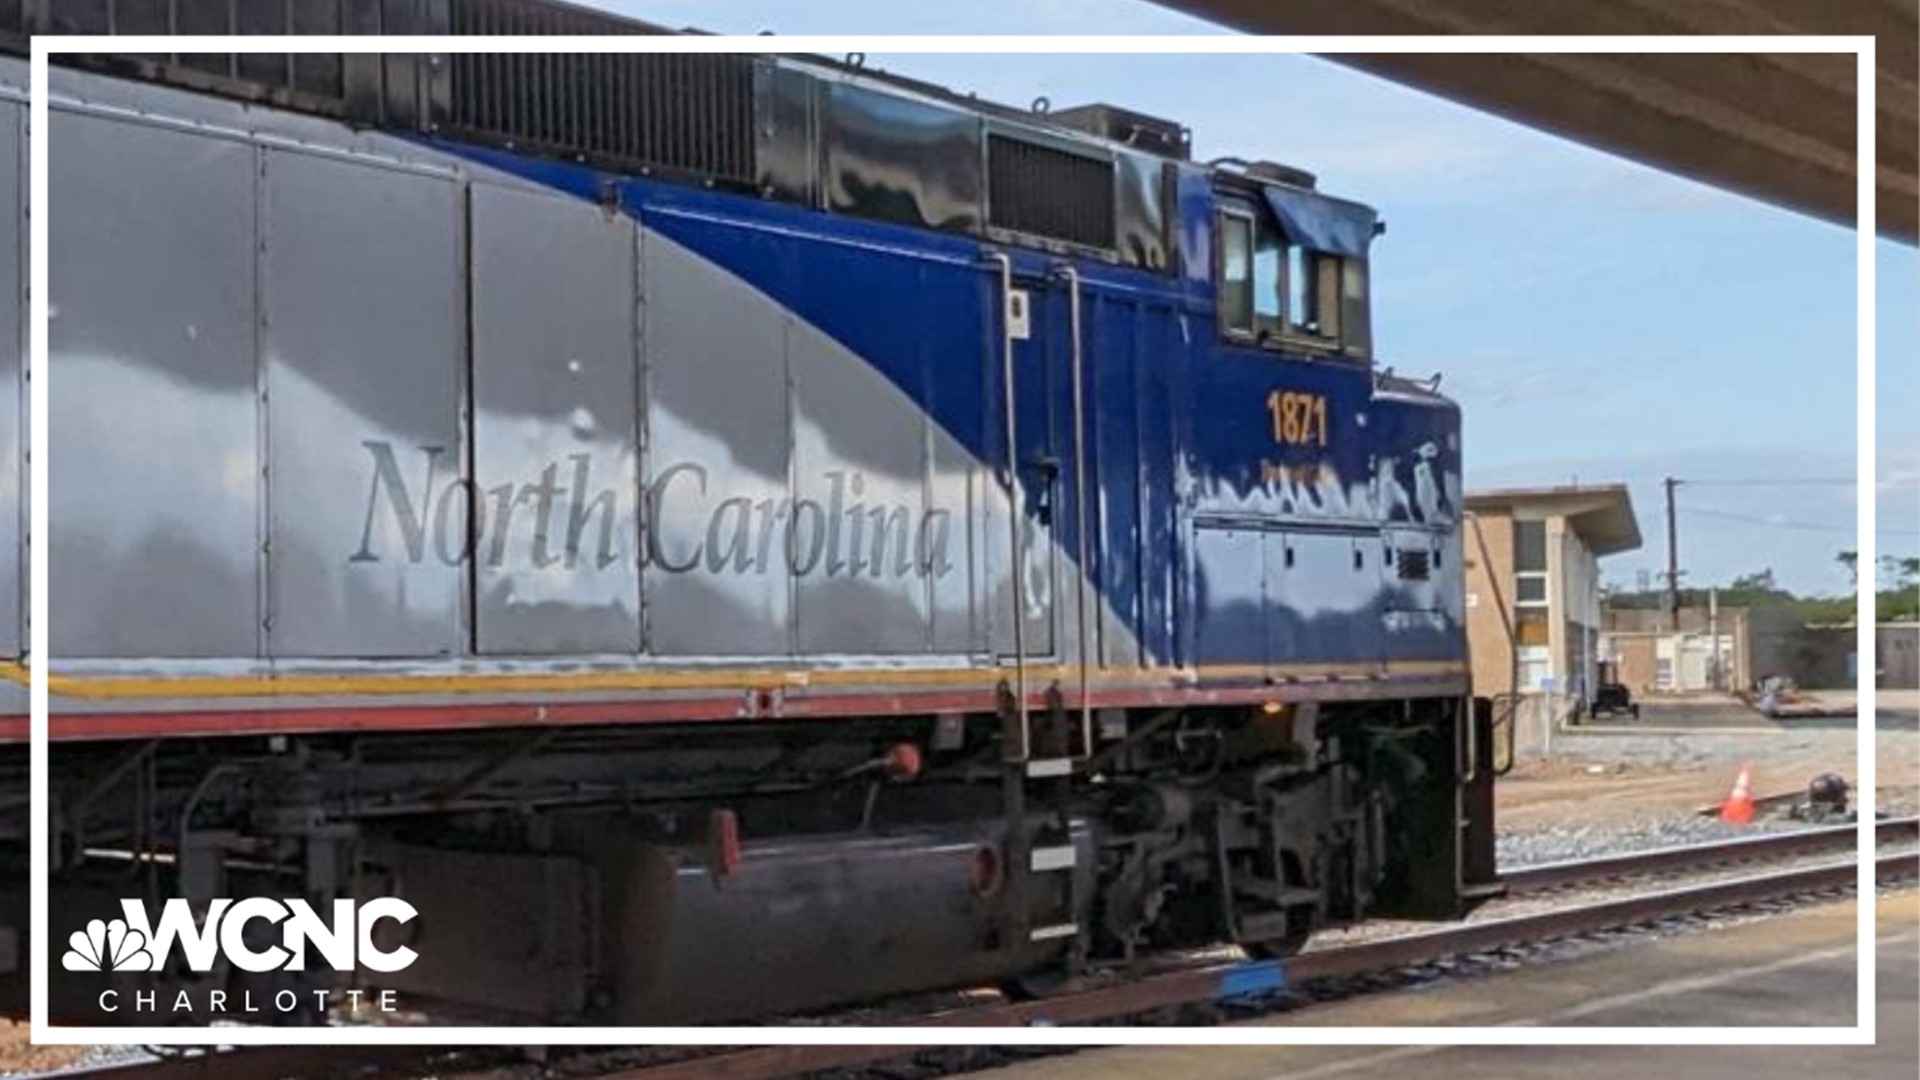 The train involved appears to be Amtrak's 75 Carolinian/Piedmont train en route to Charlotte